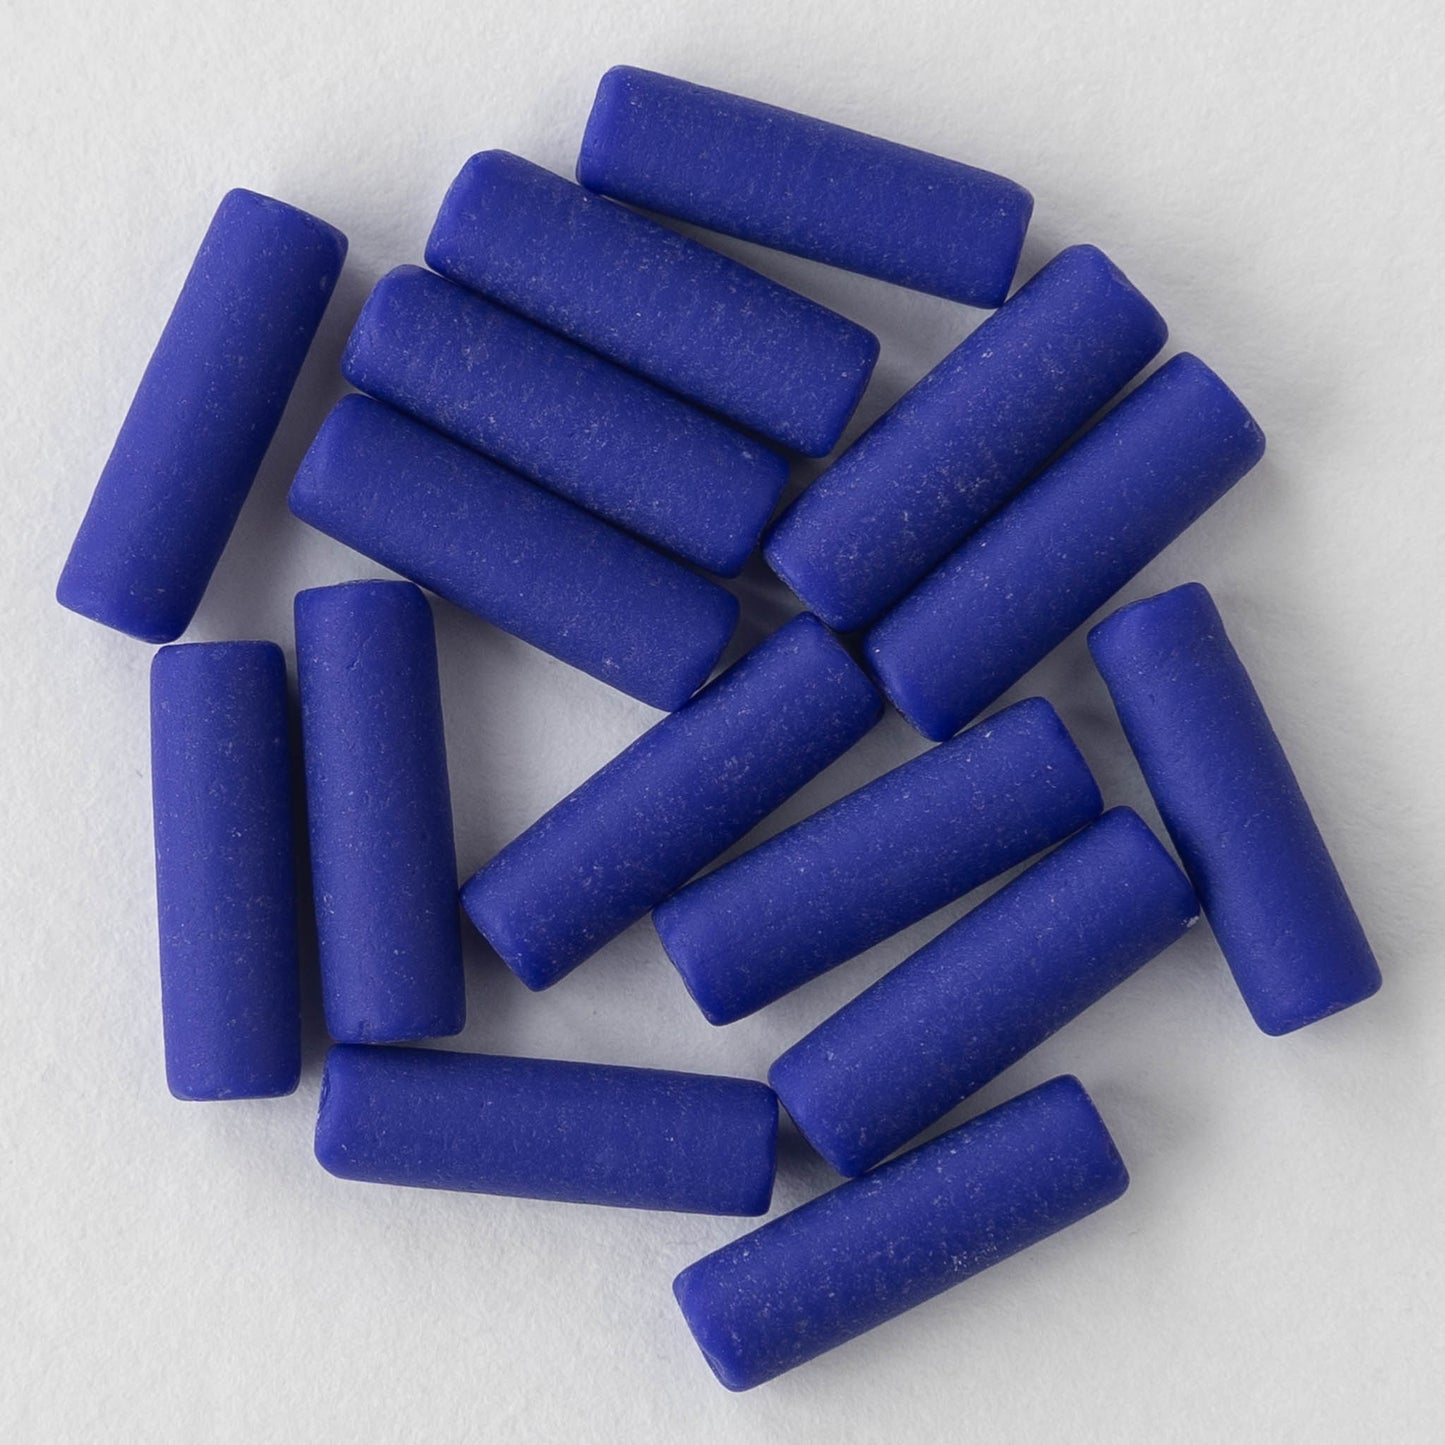 4x14mm Frosted Glass Tube Beads - Opaque Cobalt Blue - 30 or 90